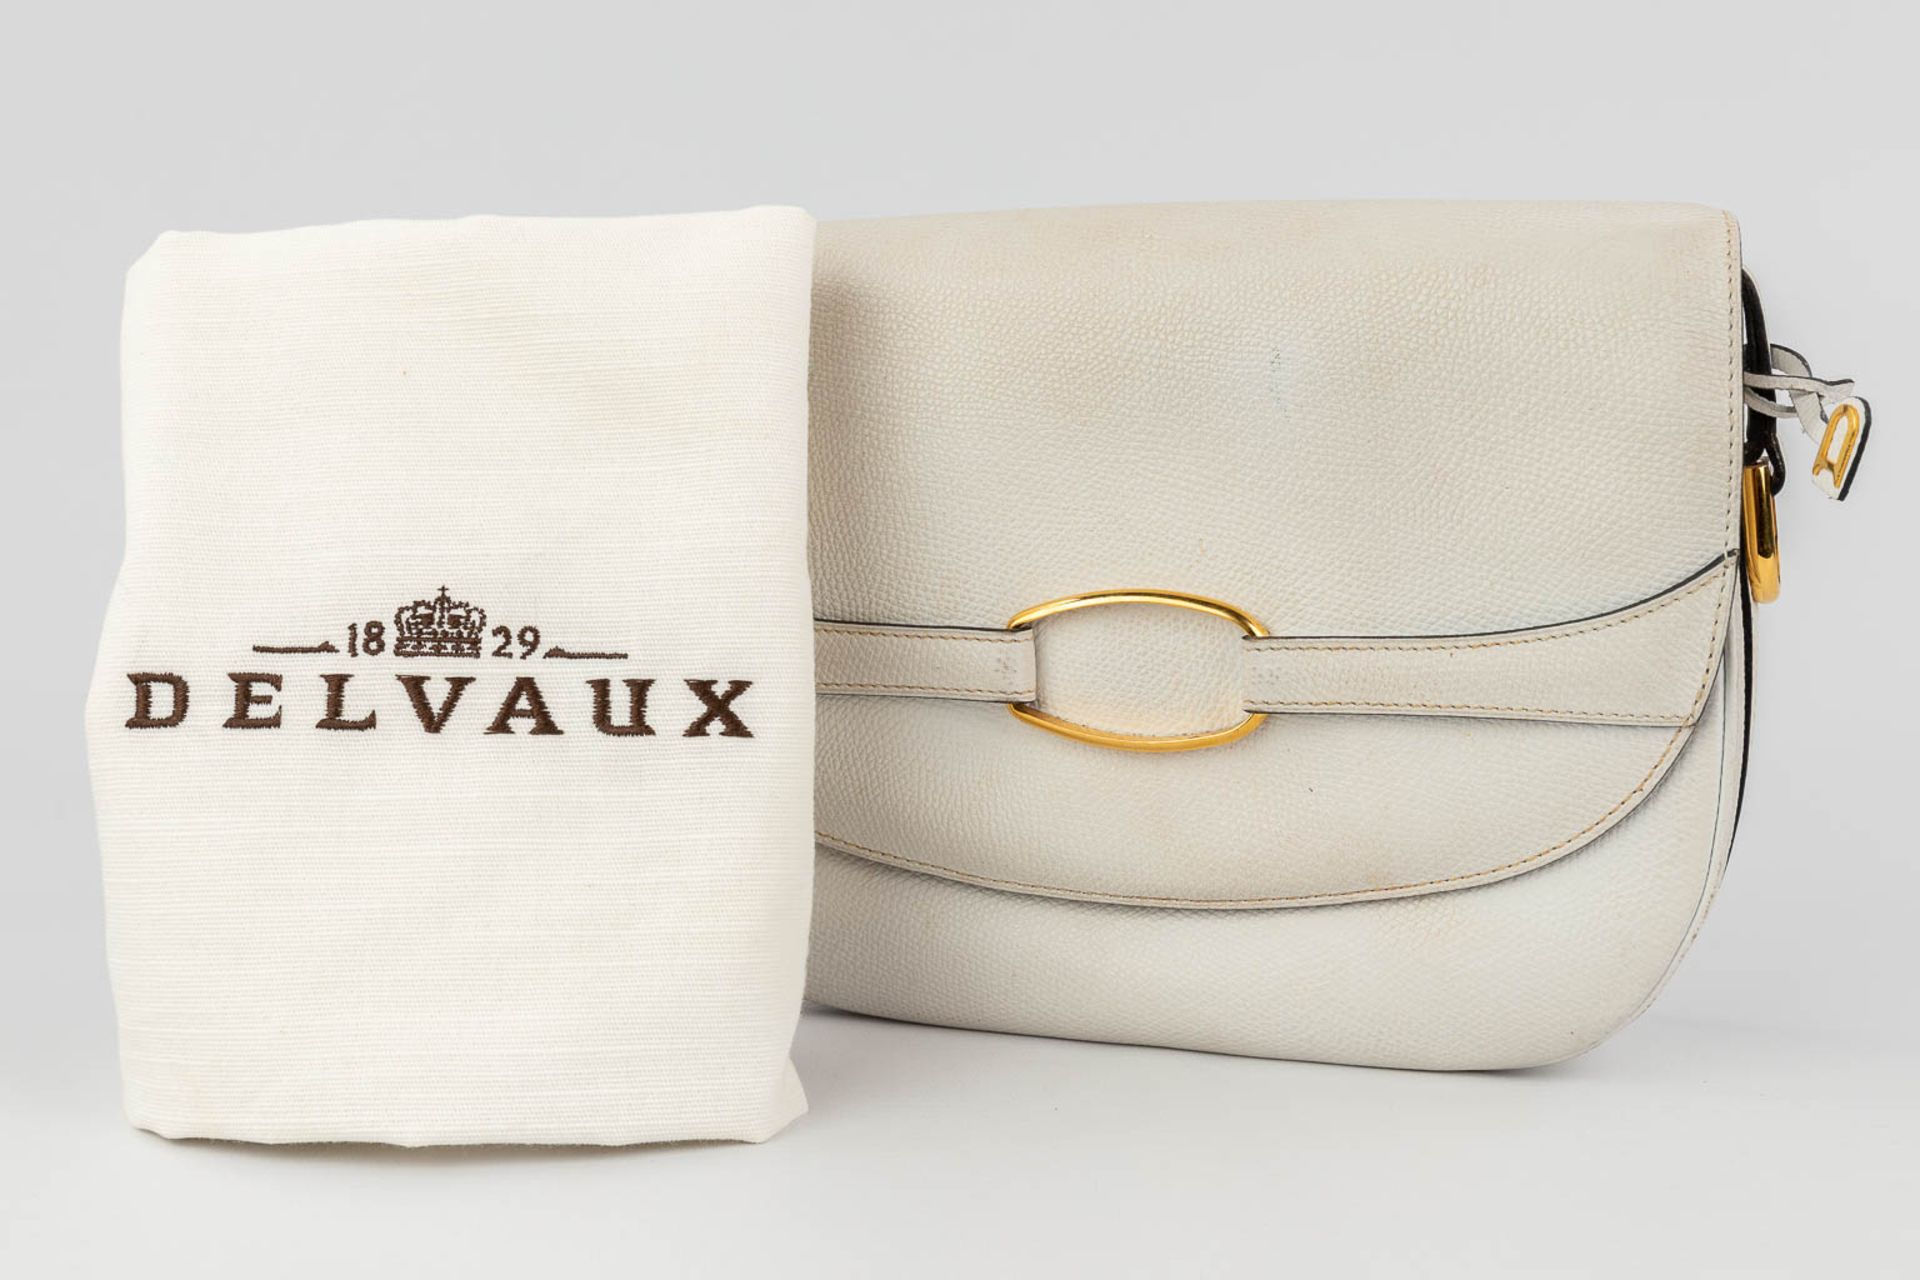 Delvaux, a handbag made of white leather with gold-plated elements. (W: 26 x H: 19 cm) - Bild 3 aus 19